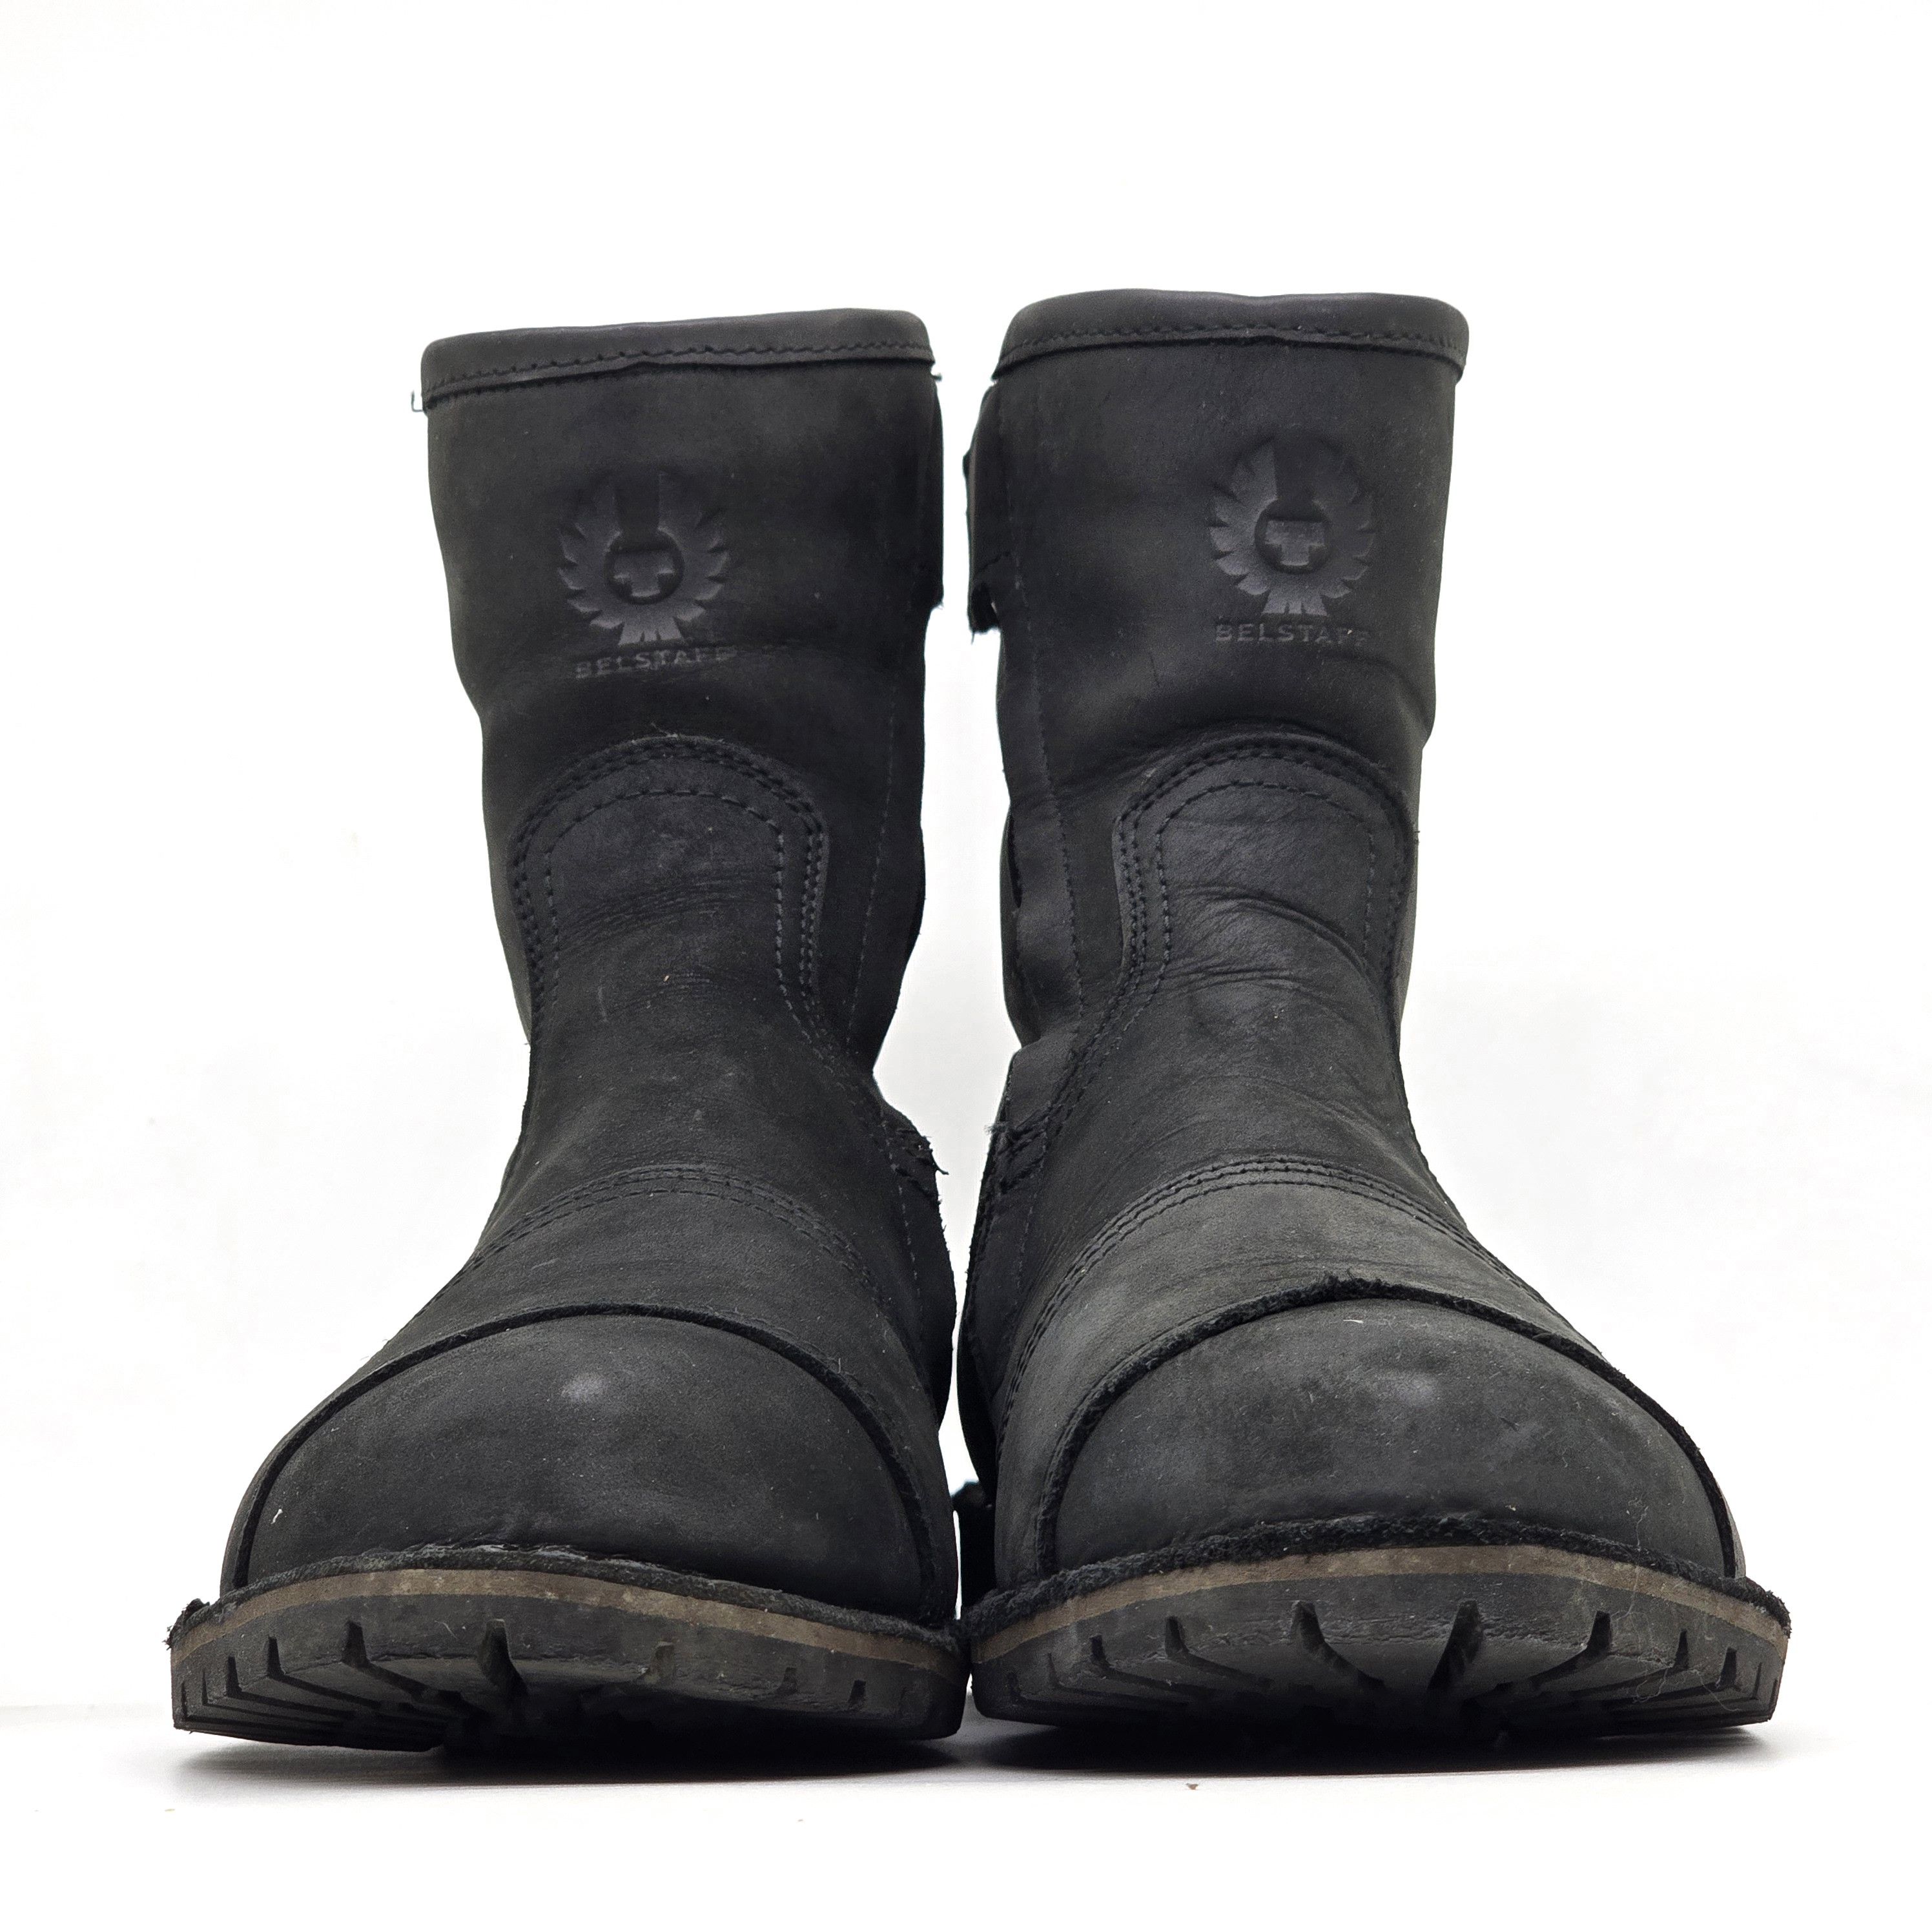 Belstaff - Duration Motorcycle Boots - 3